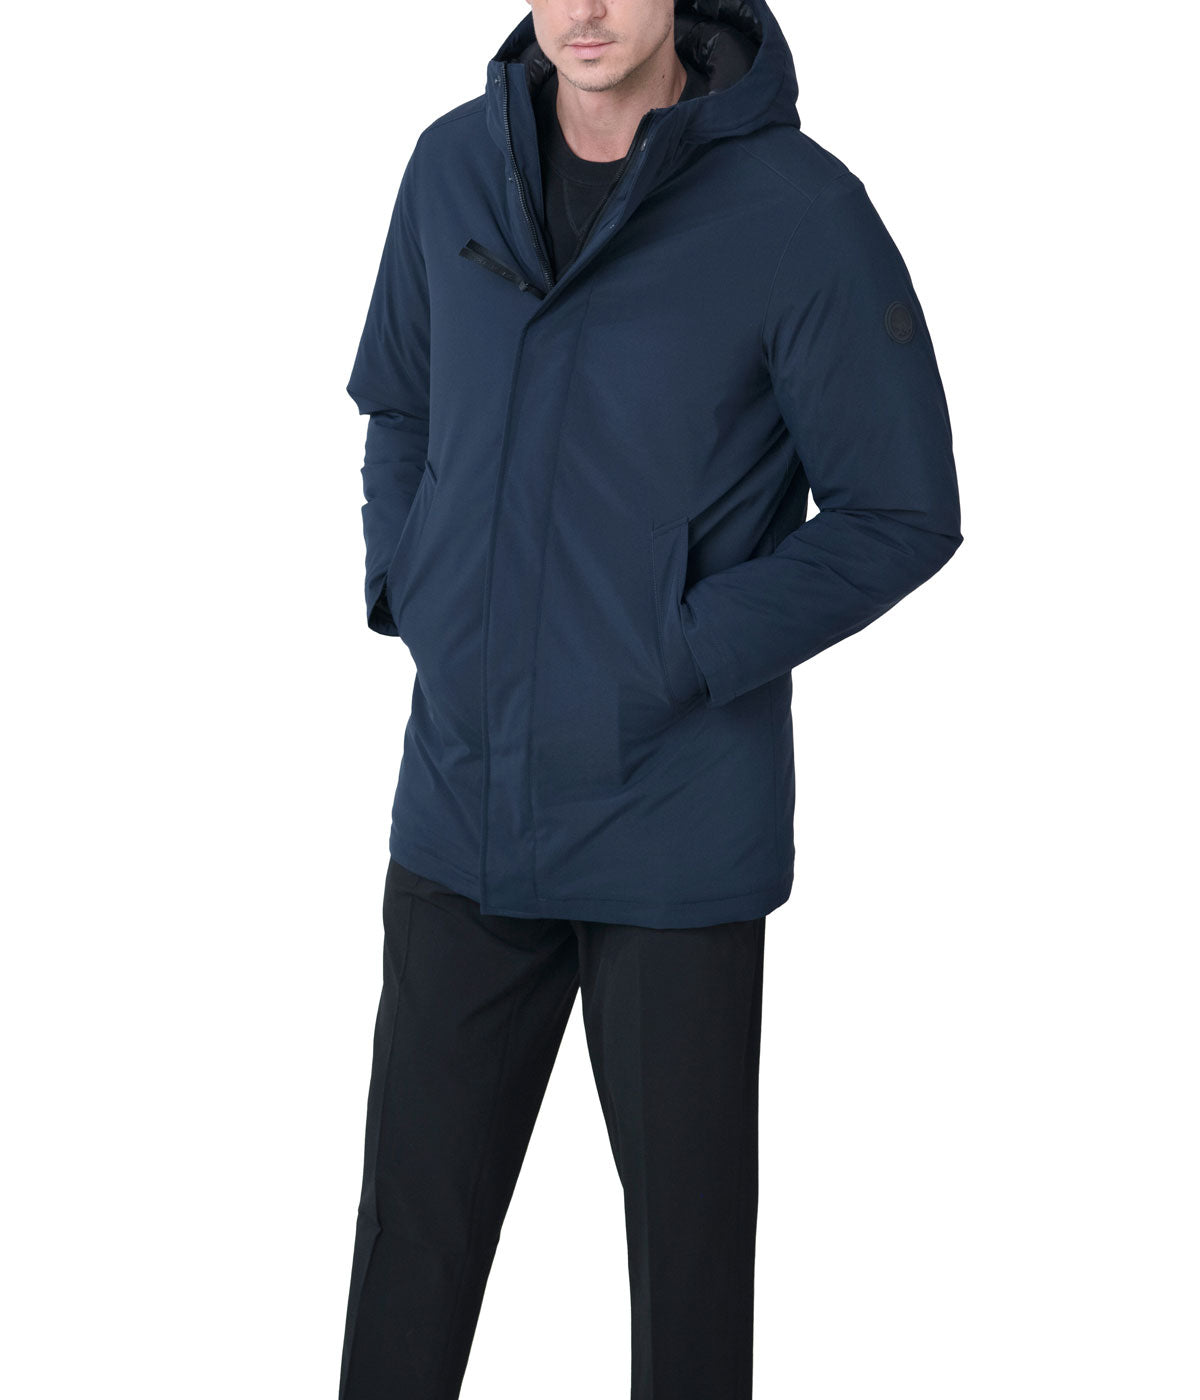 Everdas 34.5" Recycled Hooded Benchwarmer Coat Midnight